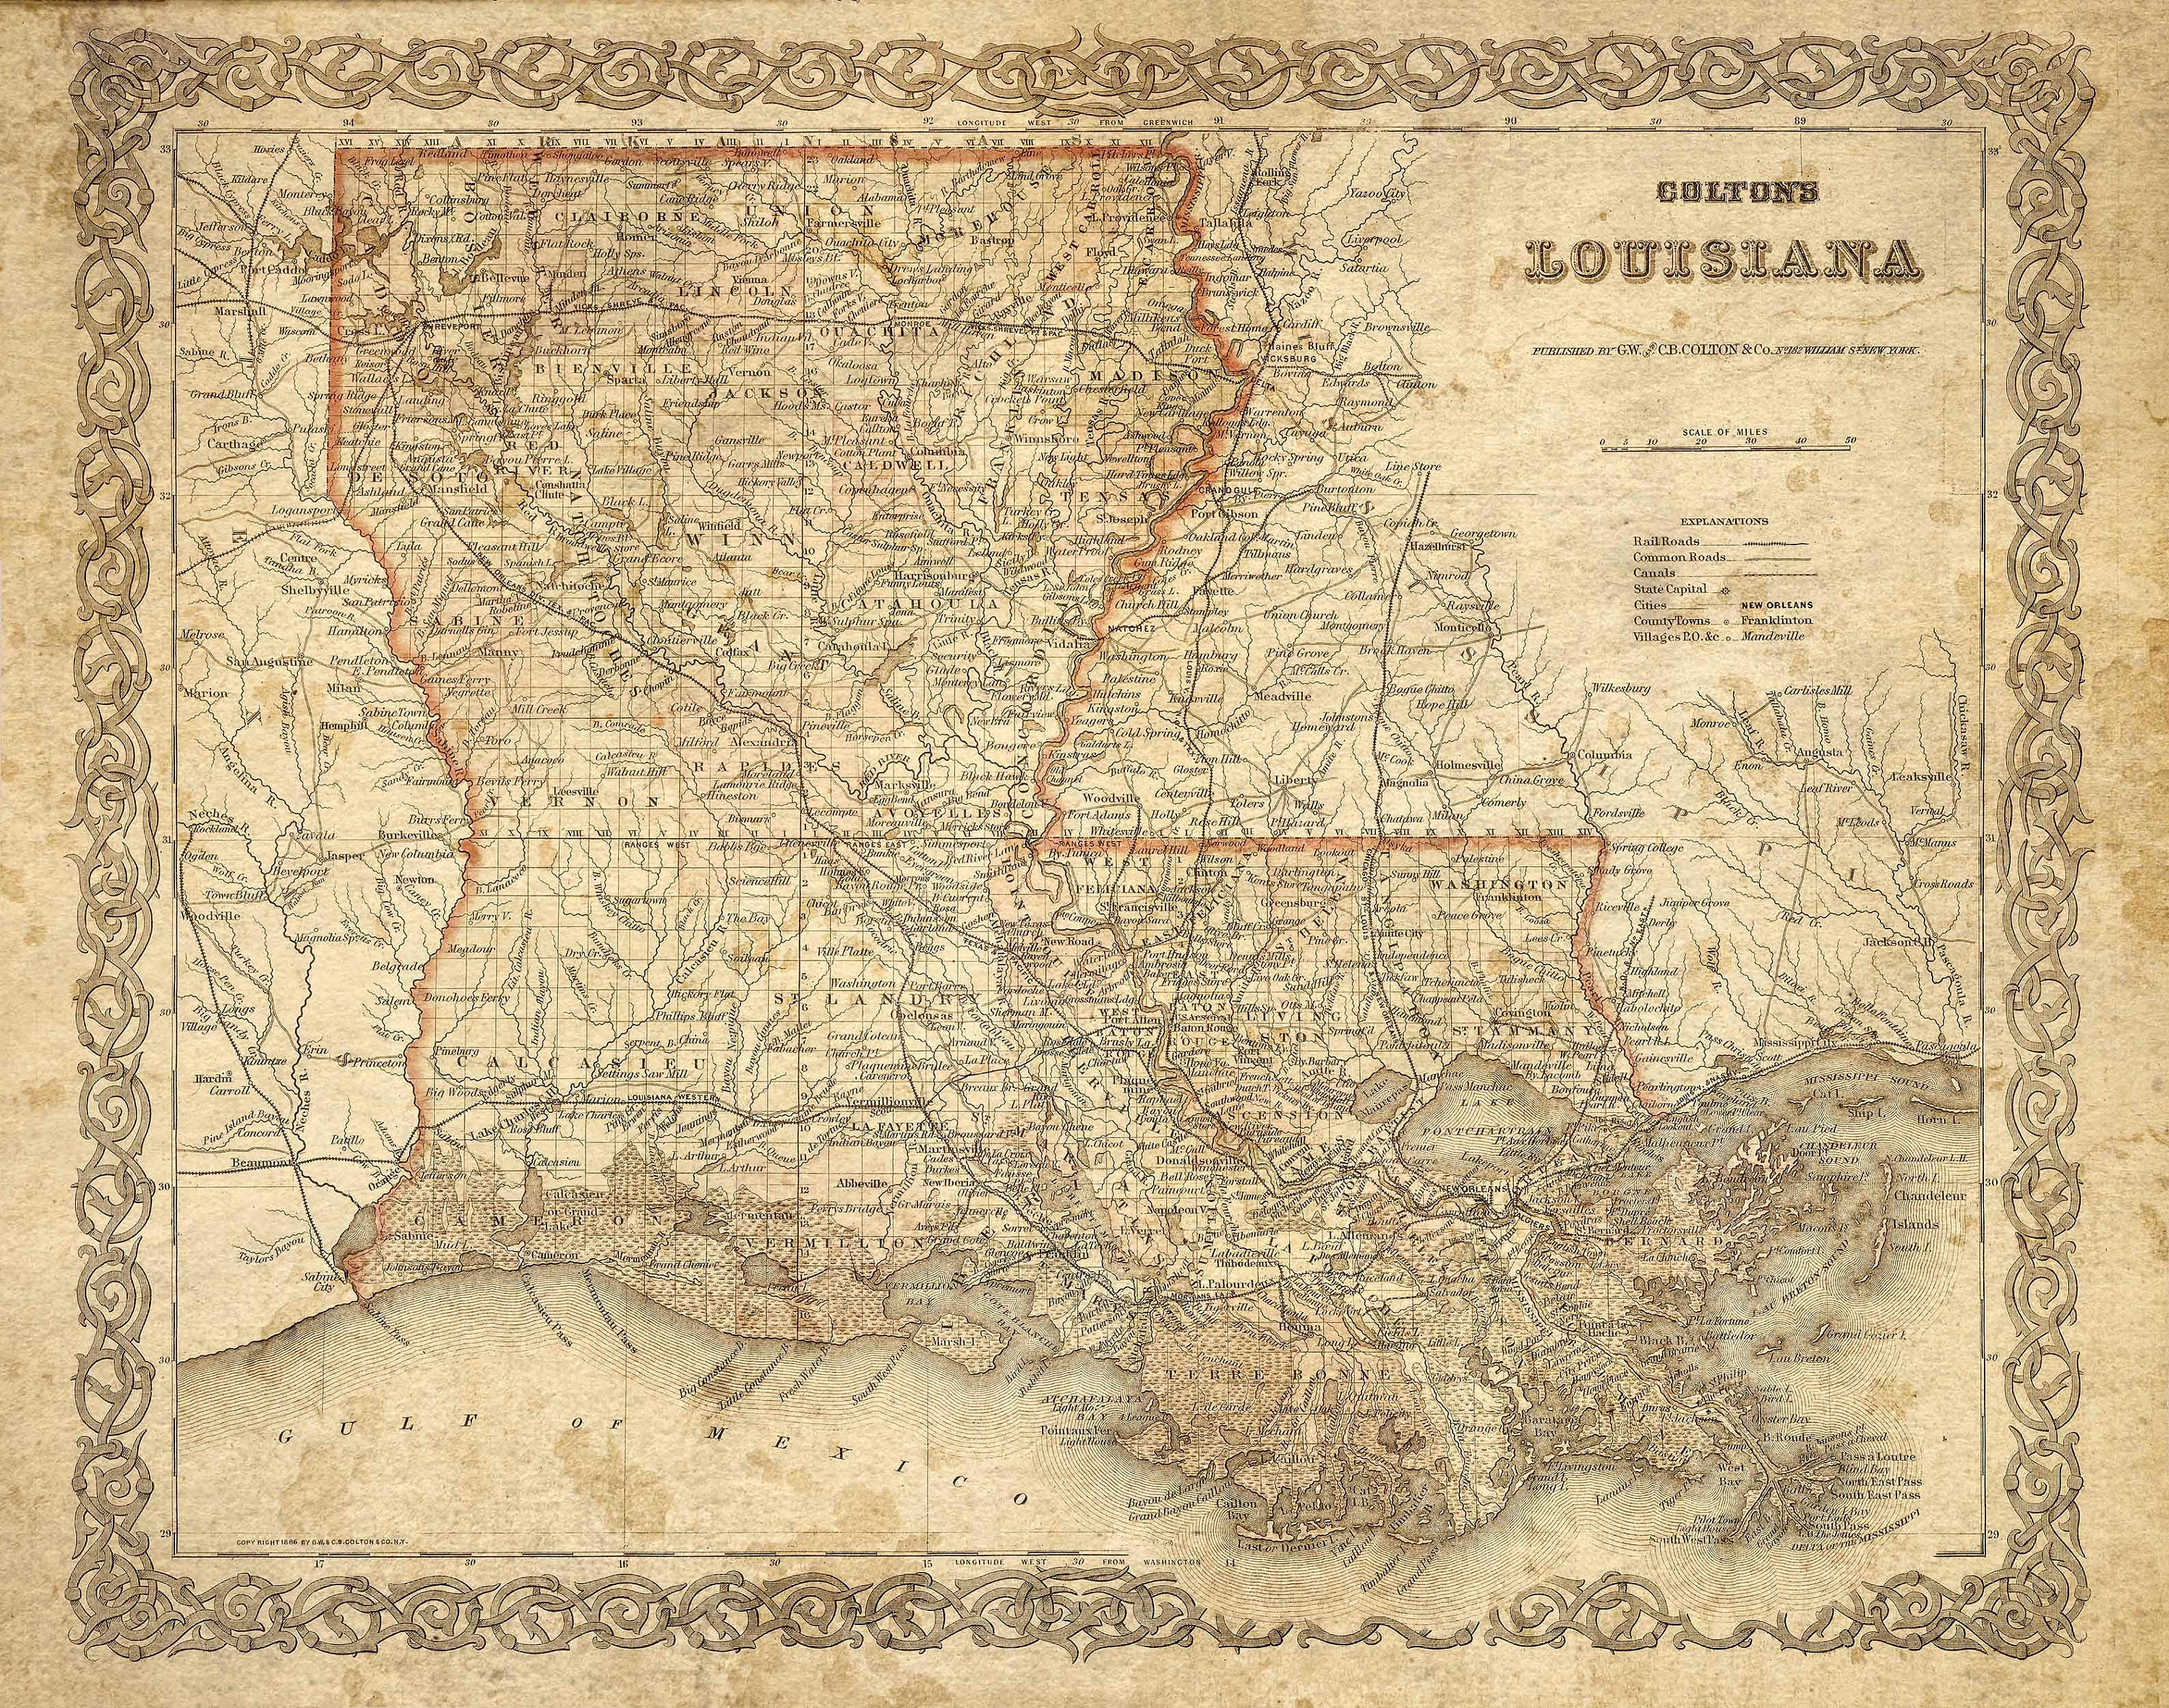  HISTORIX Vintage 1896 Map of Louisiana - 24x36 Inch Vintage Map  of Louisiana Wall Art - Old Louisiana Wall Map Indexed Showing Cities Towns  and Railroads - Louisiana Wall Decor : Office Products